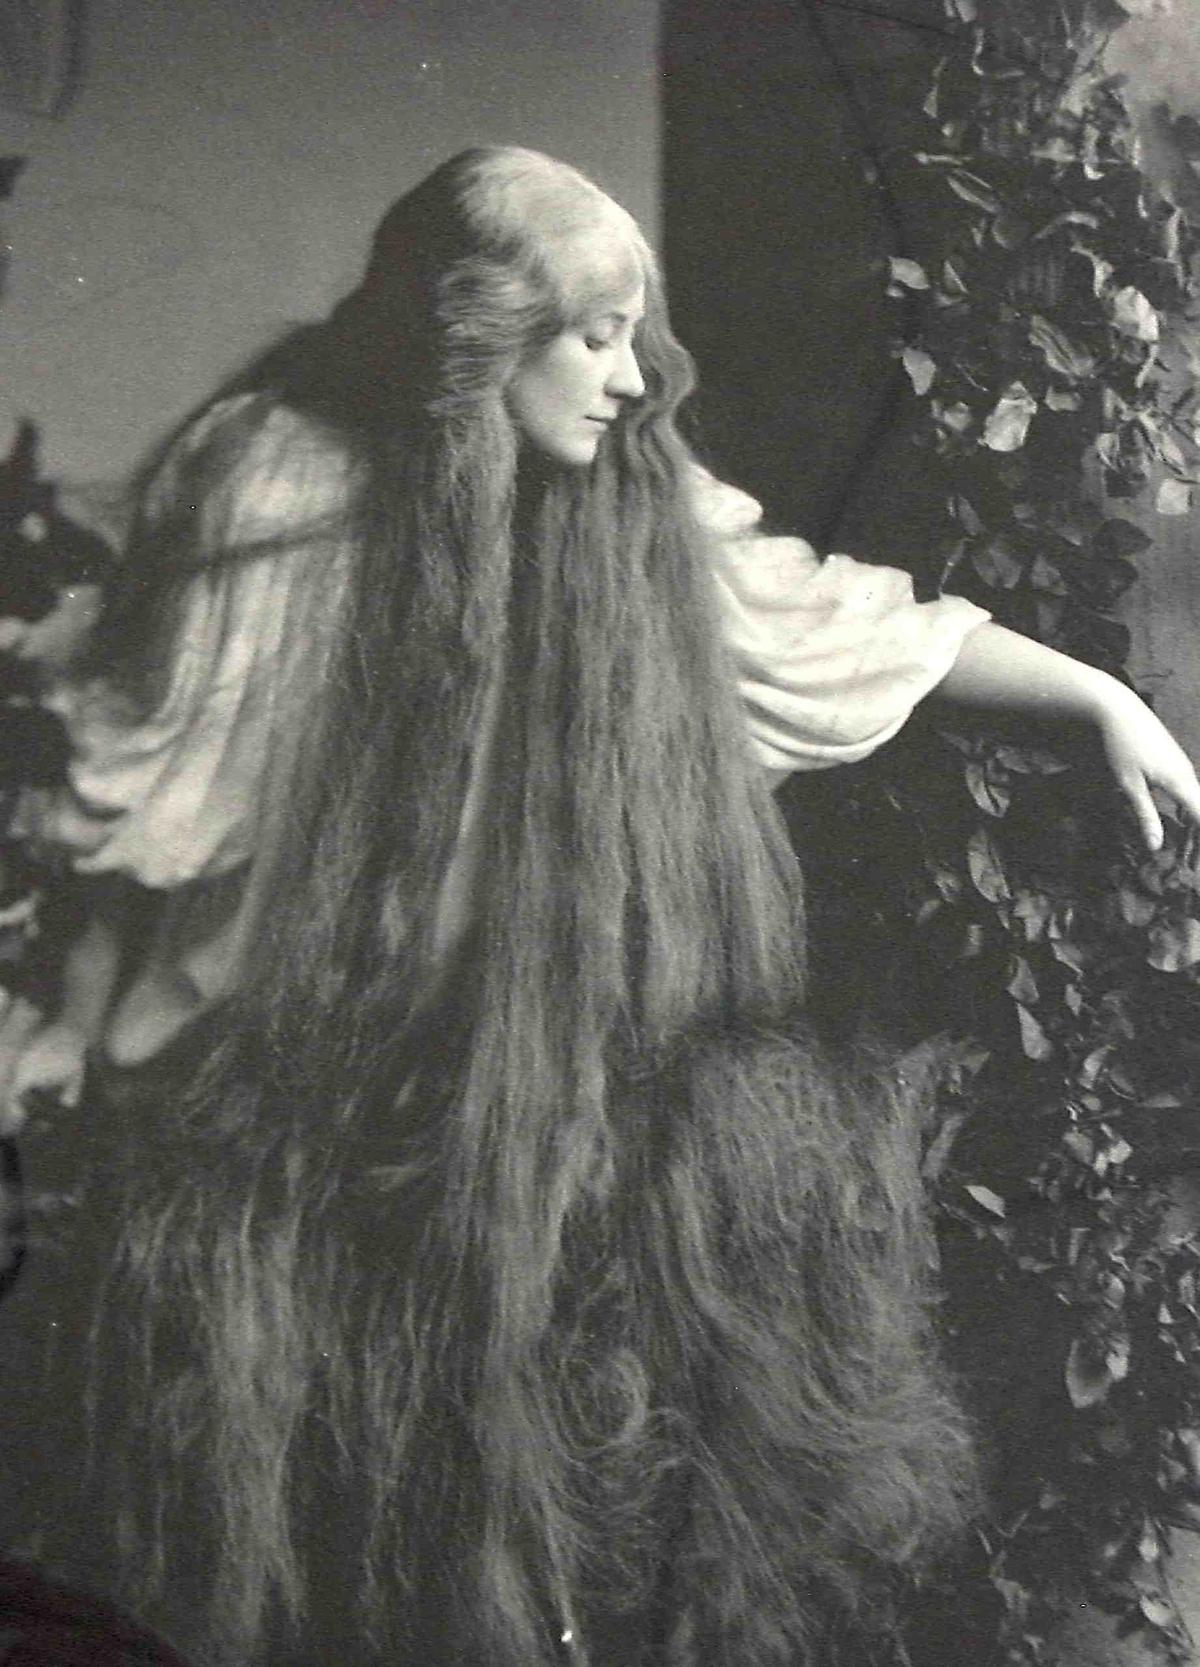 Opera singer Mary Garden dressed as Melisande for an opera in 1908. (Public Domain)